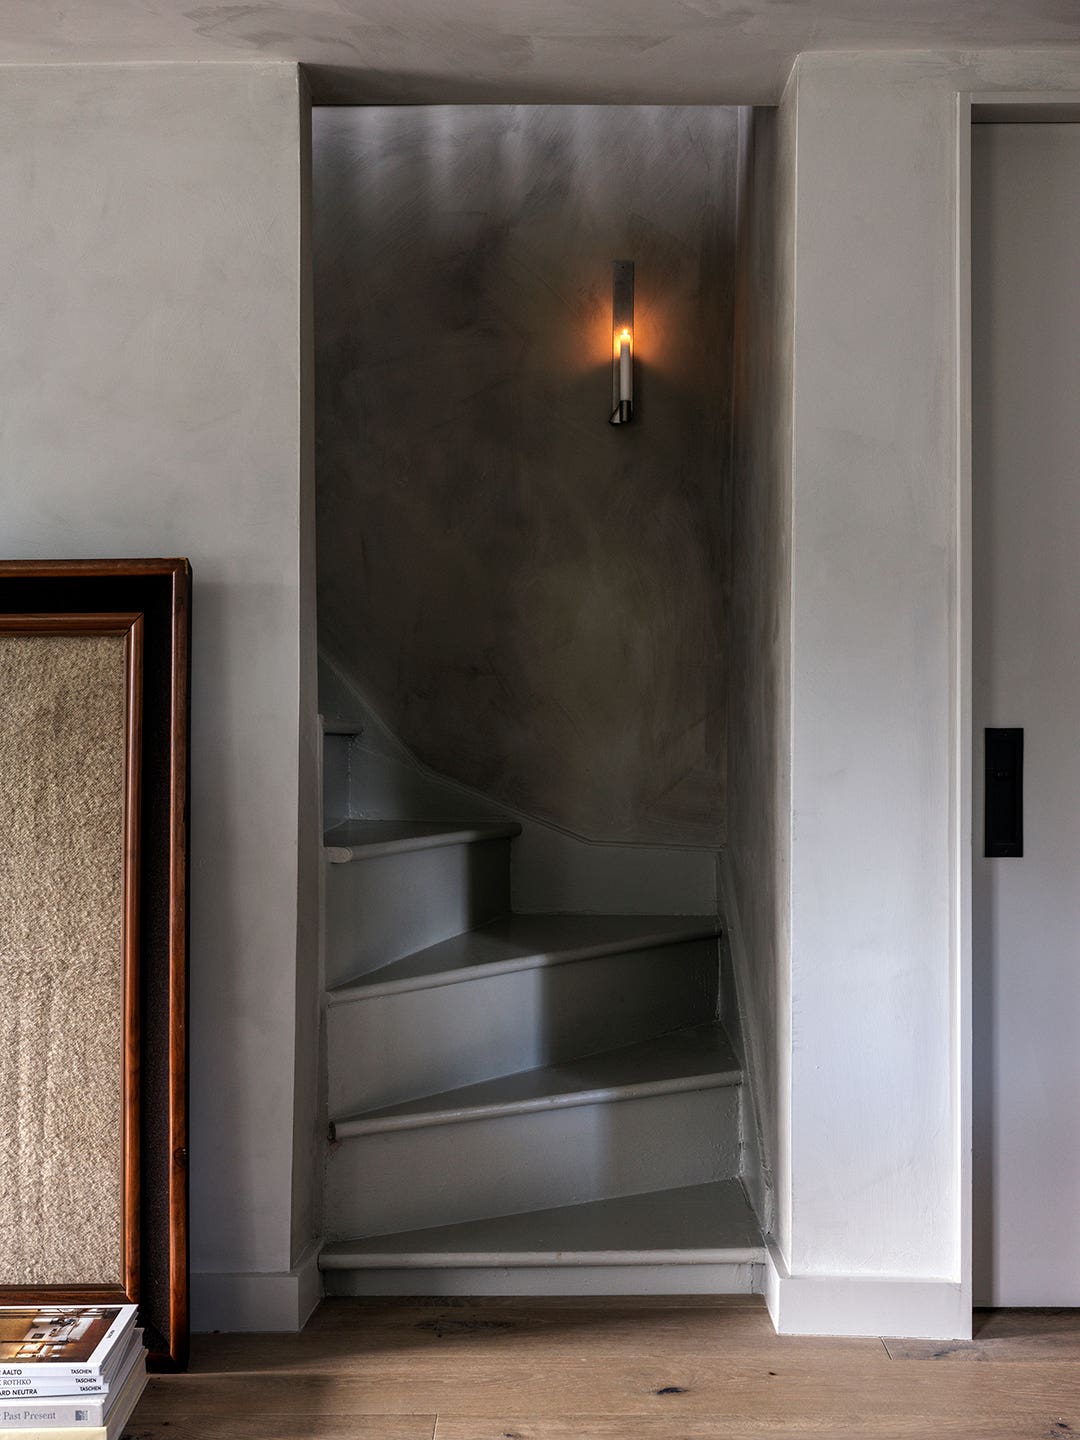 Narnia Who? This Cottage's Attic Doors Reveal a Dramatic Marble Shower